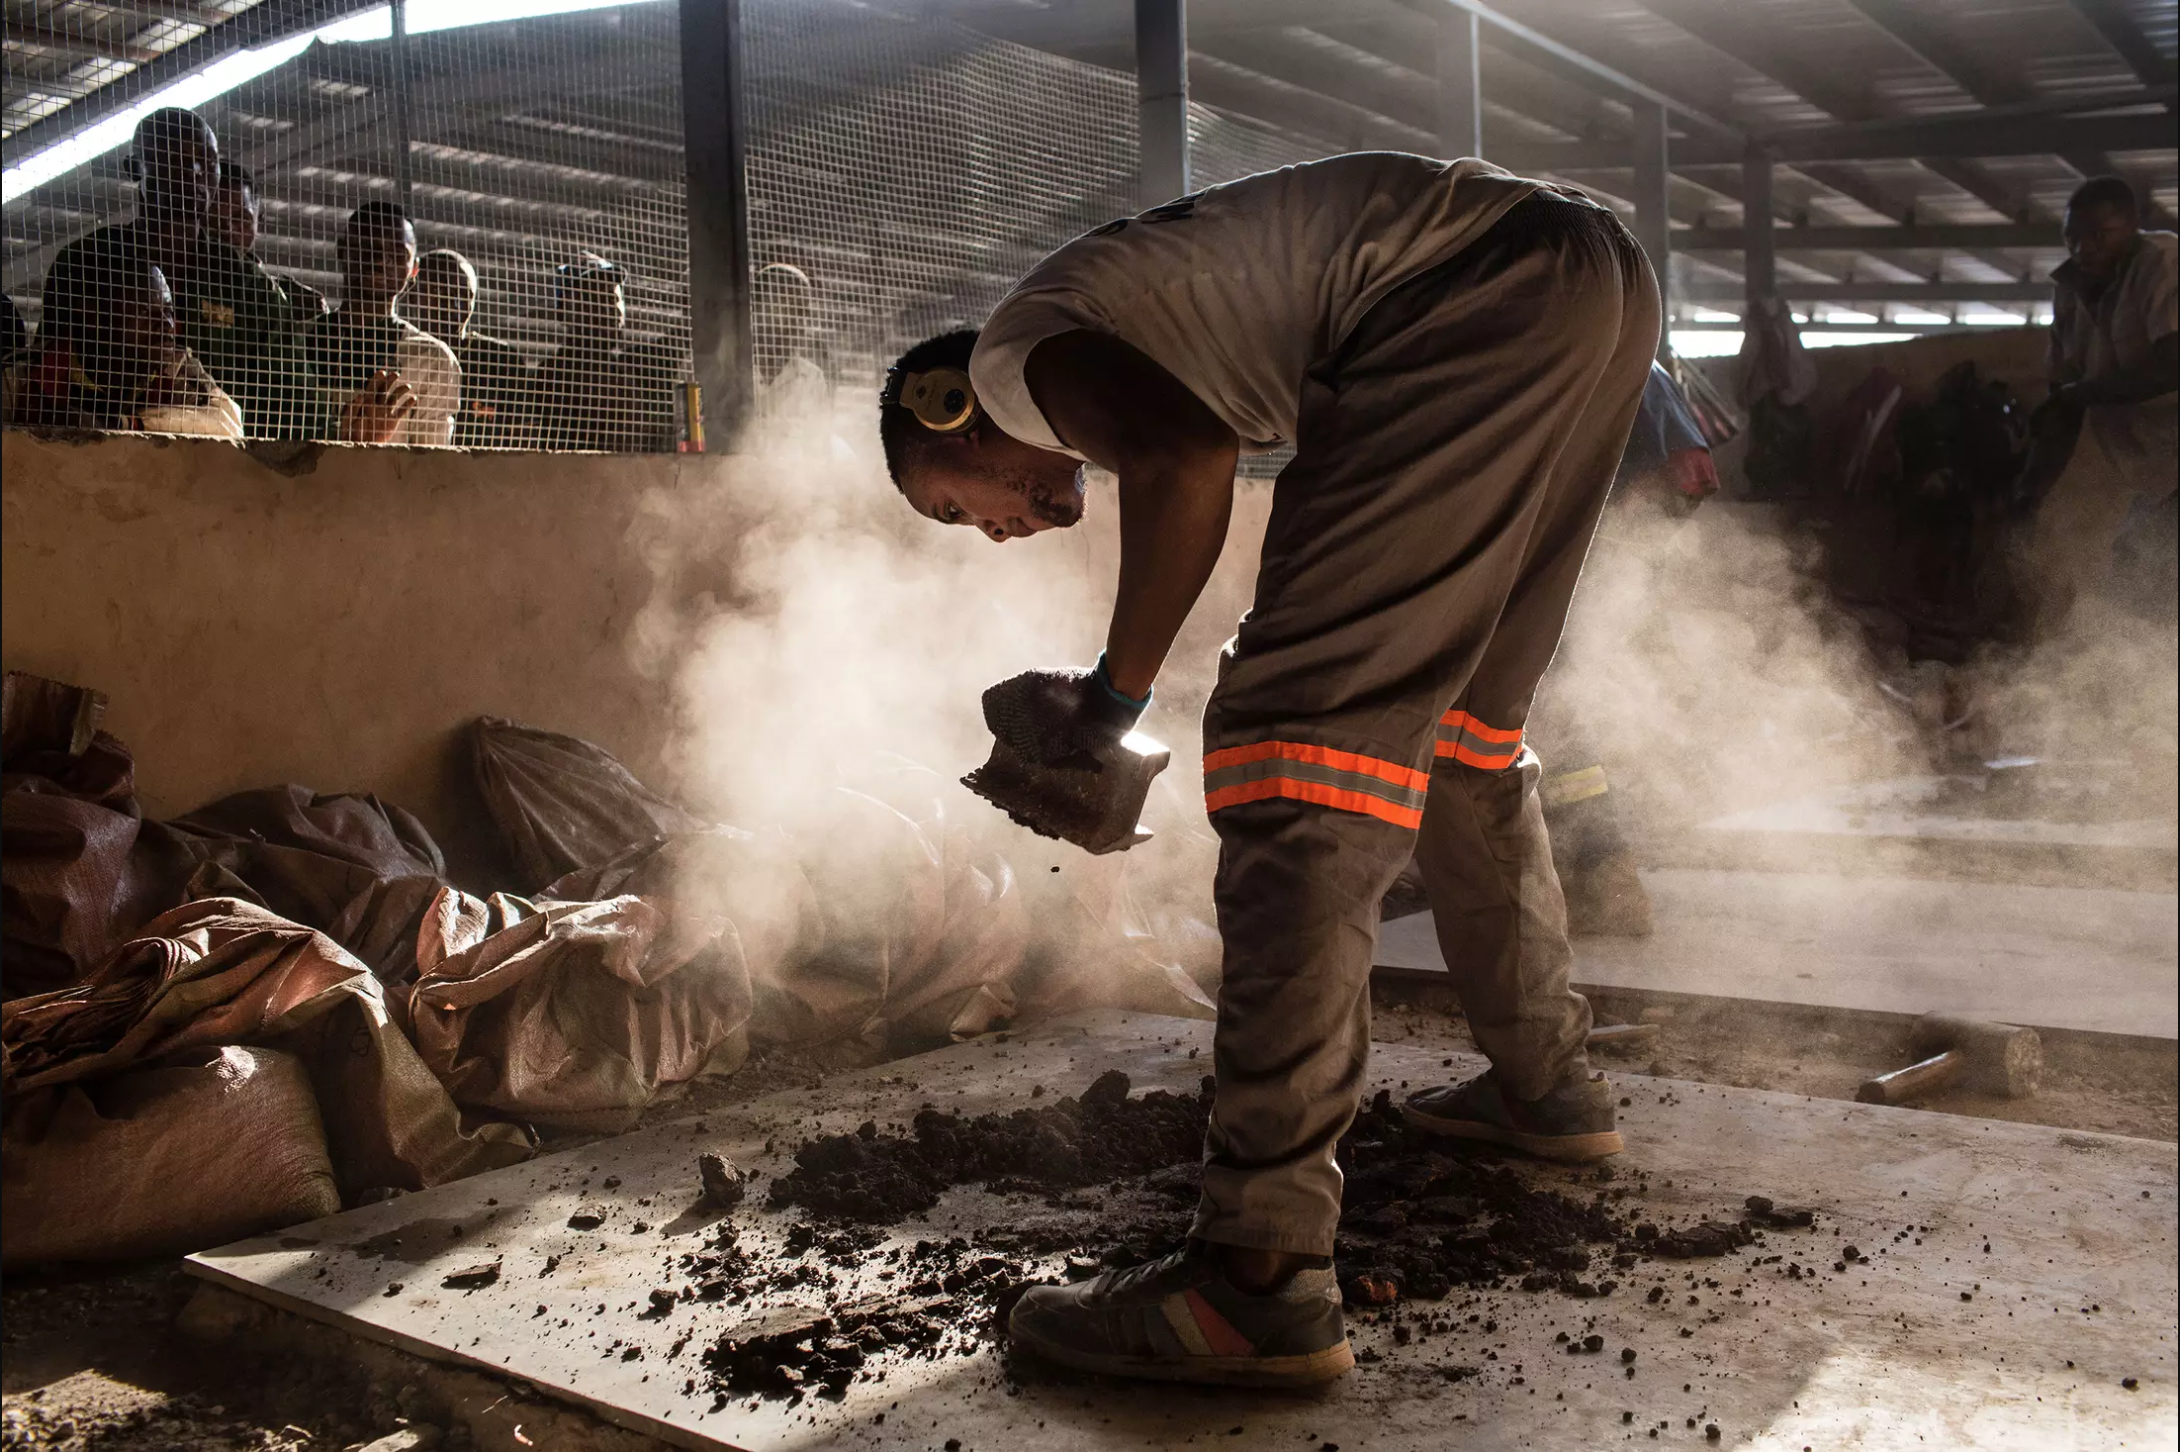 A miner crushes cobalt that will be tested for purity at the Kasulo mine depot. Image by Sebastian Meyer. Democratic Republic of Congo, 2018.